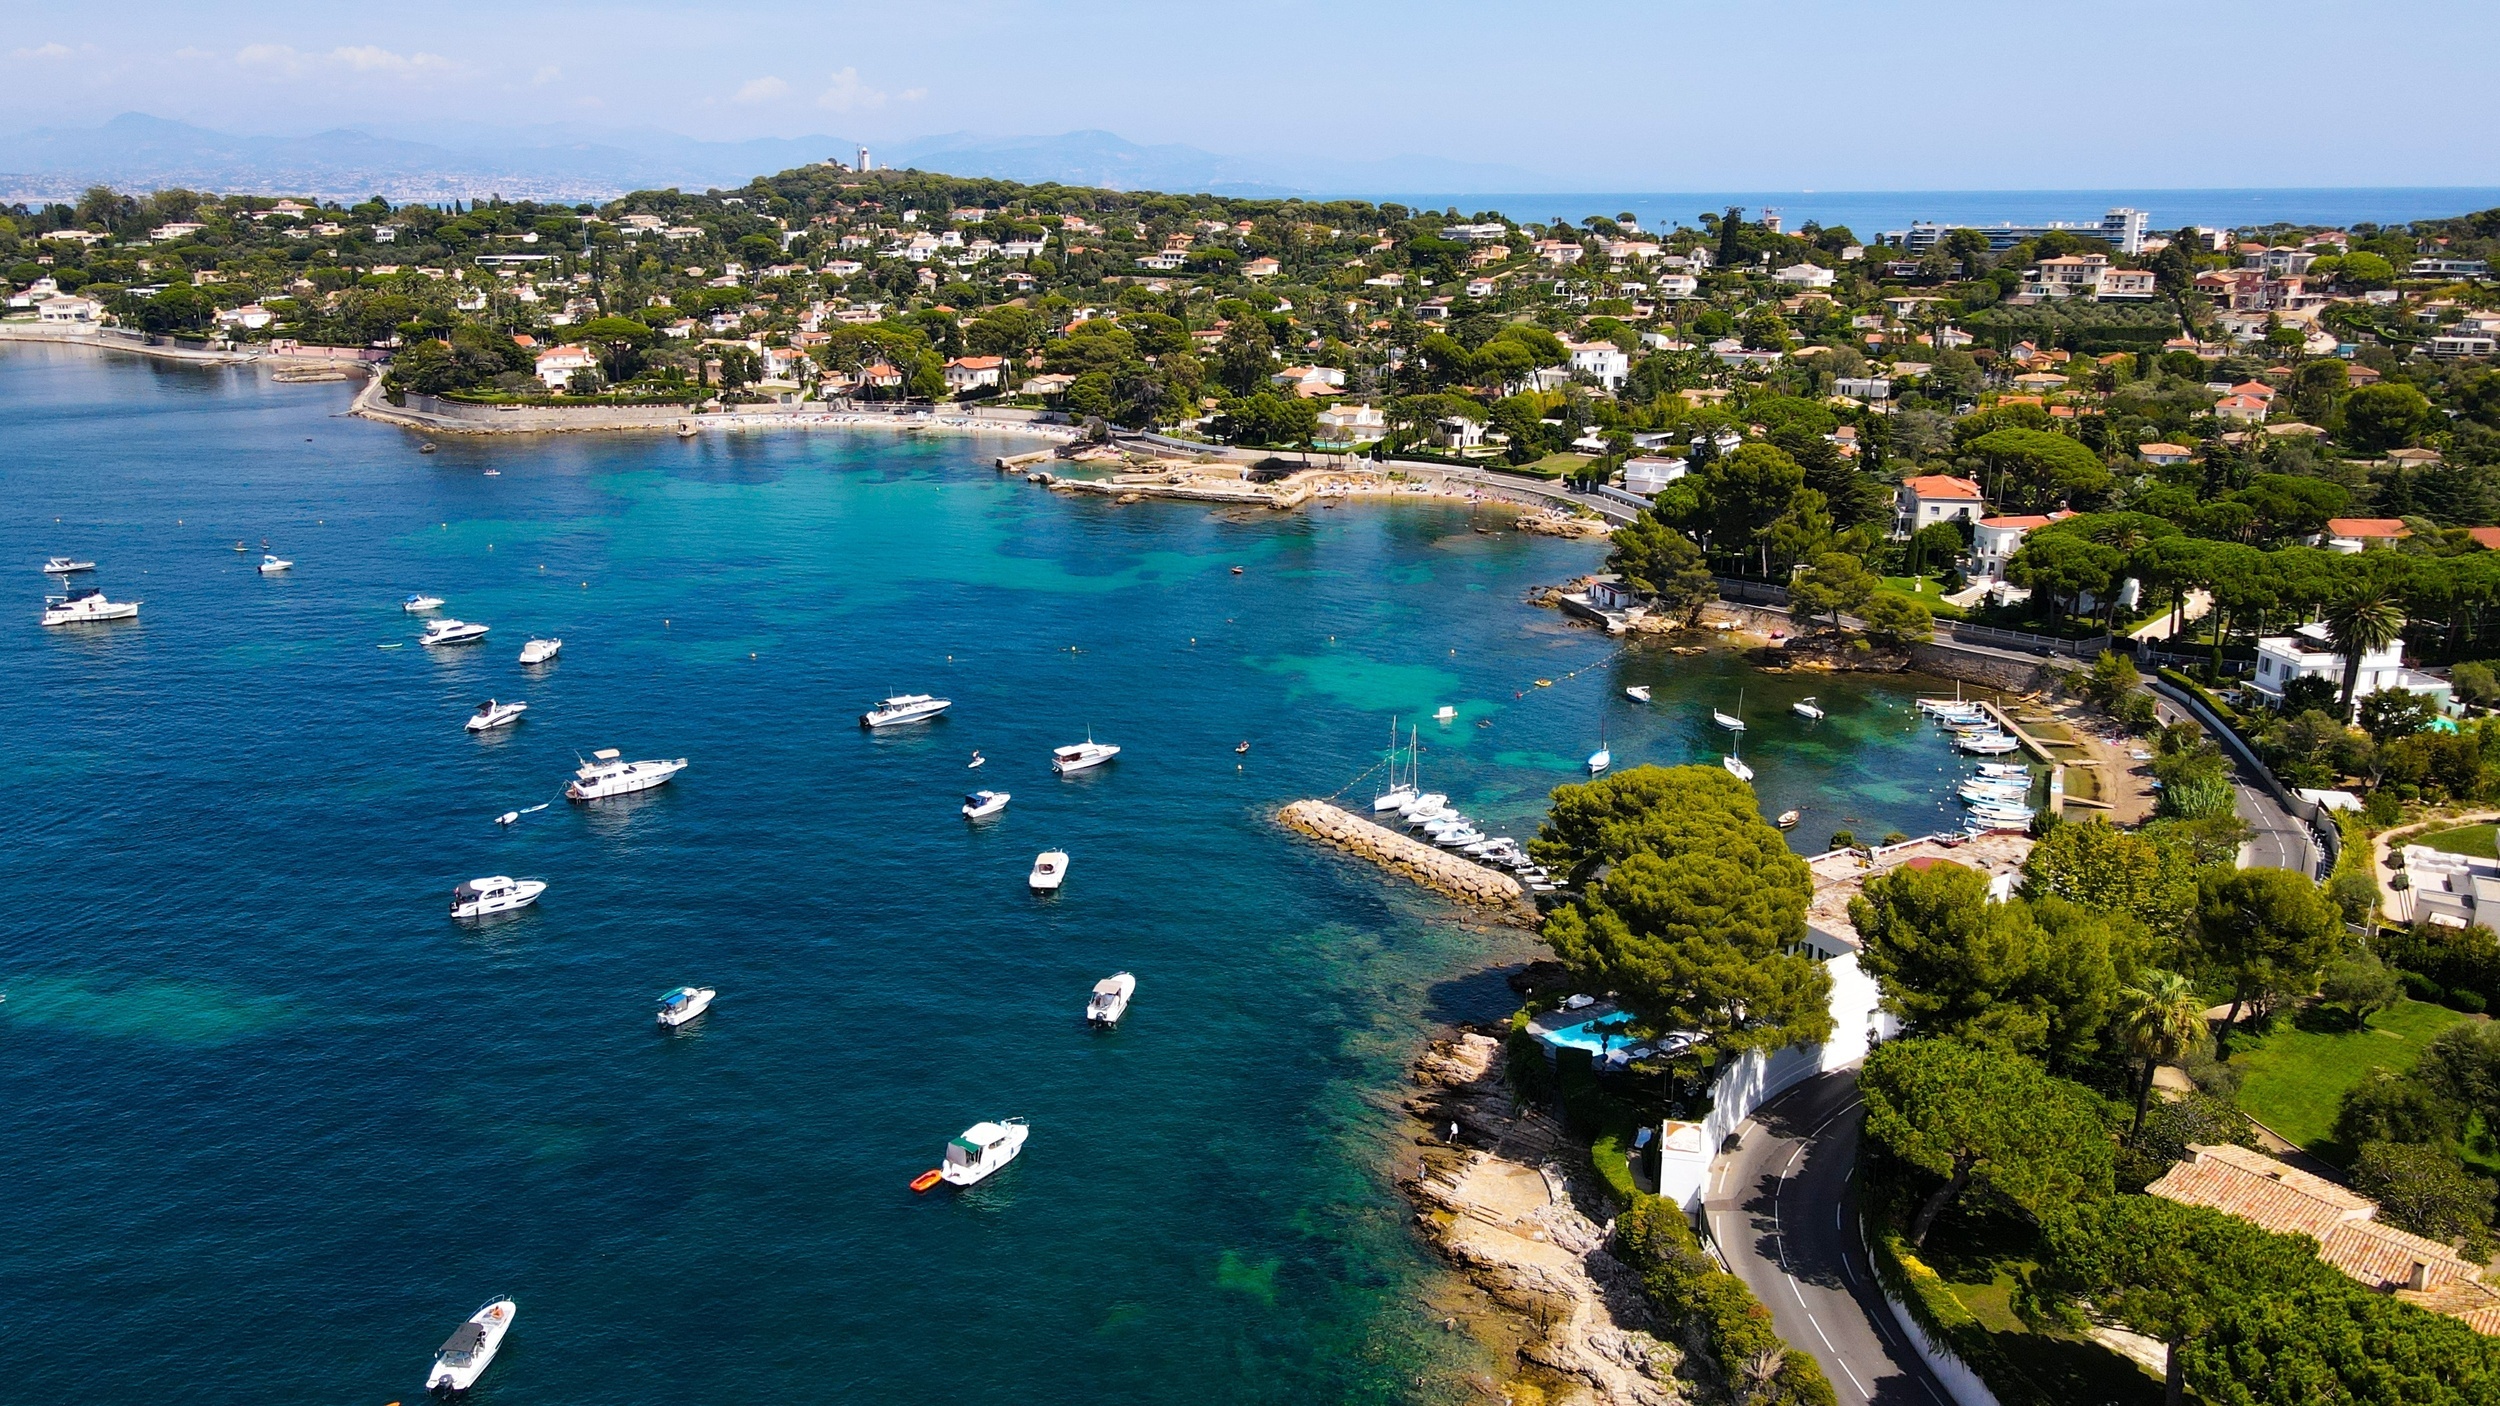 <p>Most visitors to the Cote d’Azur head for the larger cities, such as Nice or Cannes. However, Antibes, located between both, is the perfect place to truly relax. The Old Town is magnificent, with ramparts that provide epic views of the sea and the nearby peninsula with centuries-old mansions.</p><p>You may also like: <a href='https://www.yardbarker.com/lifestyle/articles/20_foods_that_are_basically_calorie_free_031924/s1__39105893'>20 foods that are basically calorie-free</a></p>